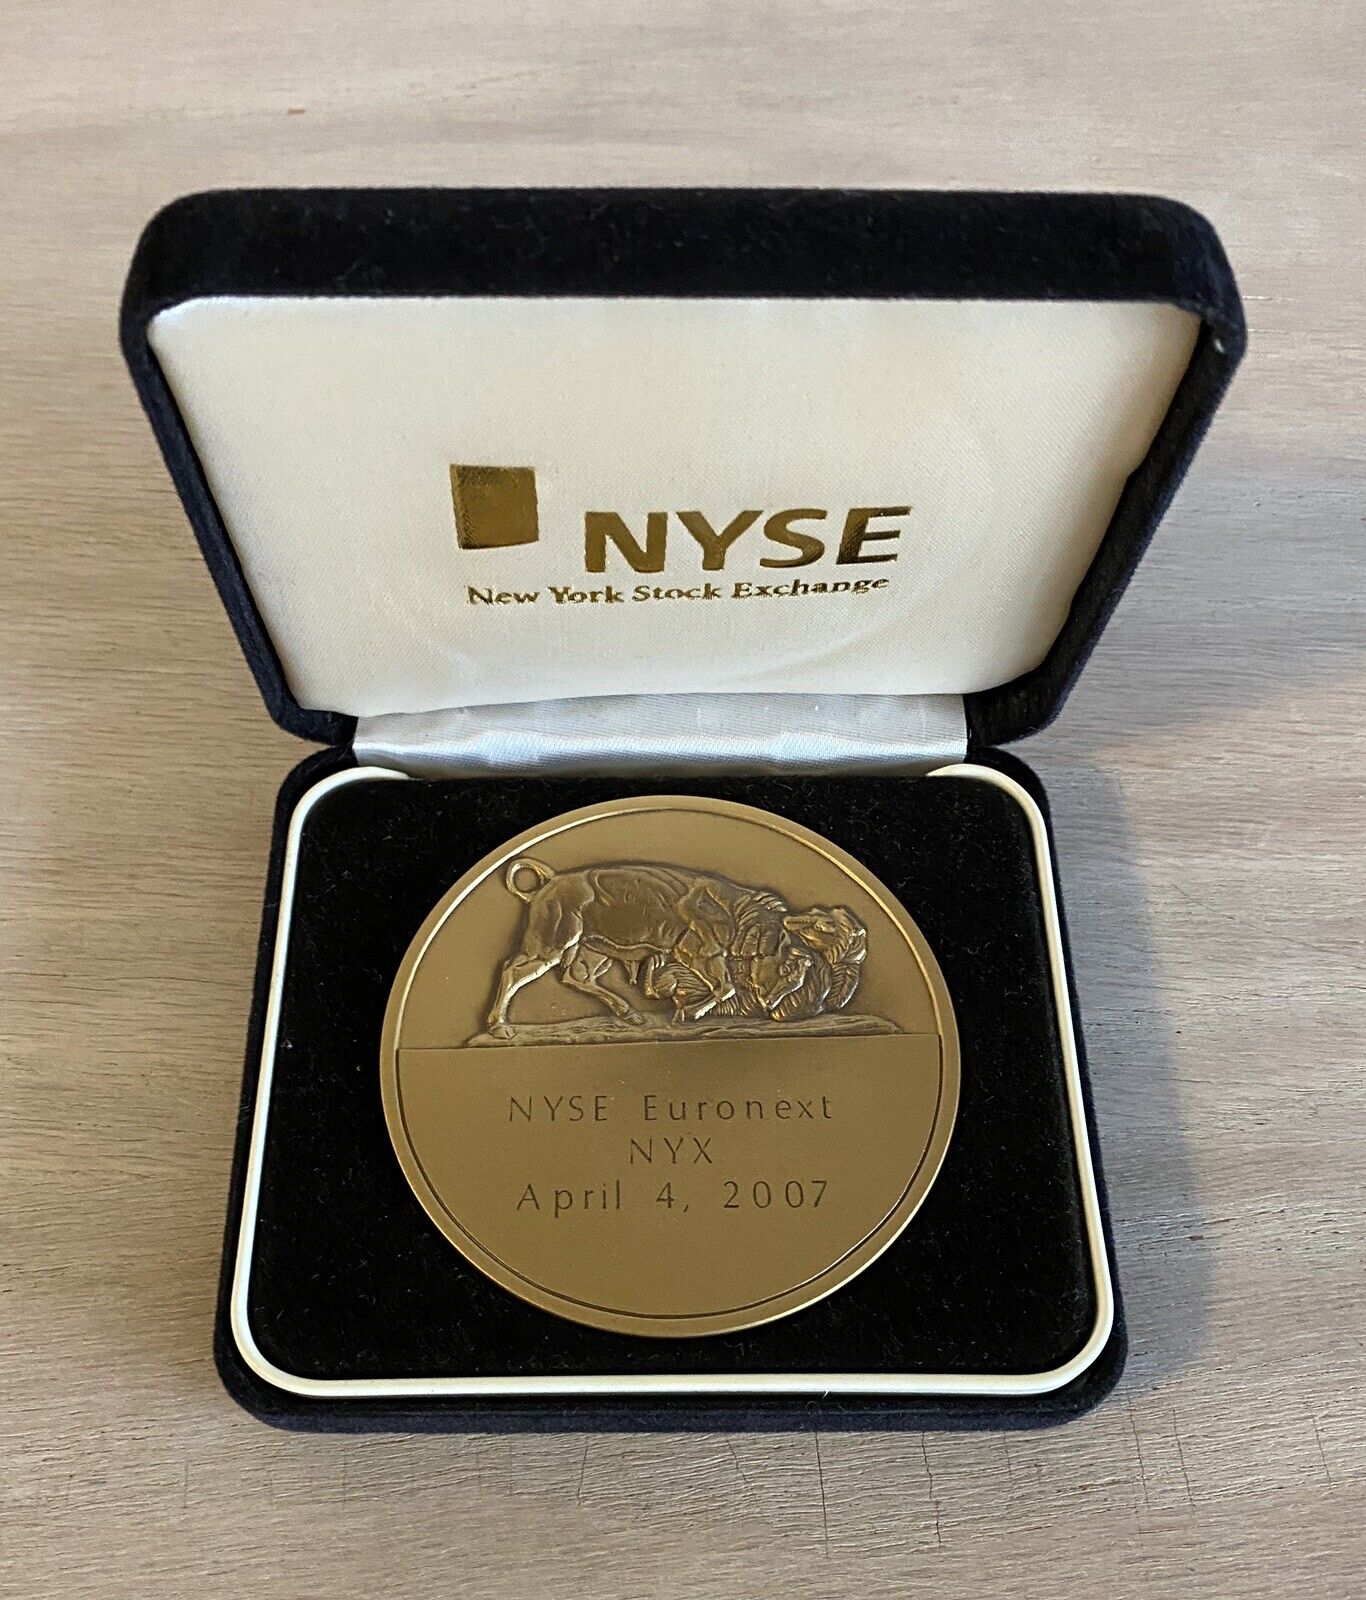 RARE NYSE Euronext Coin Commemorating merger on April 4, 2007